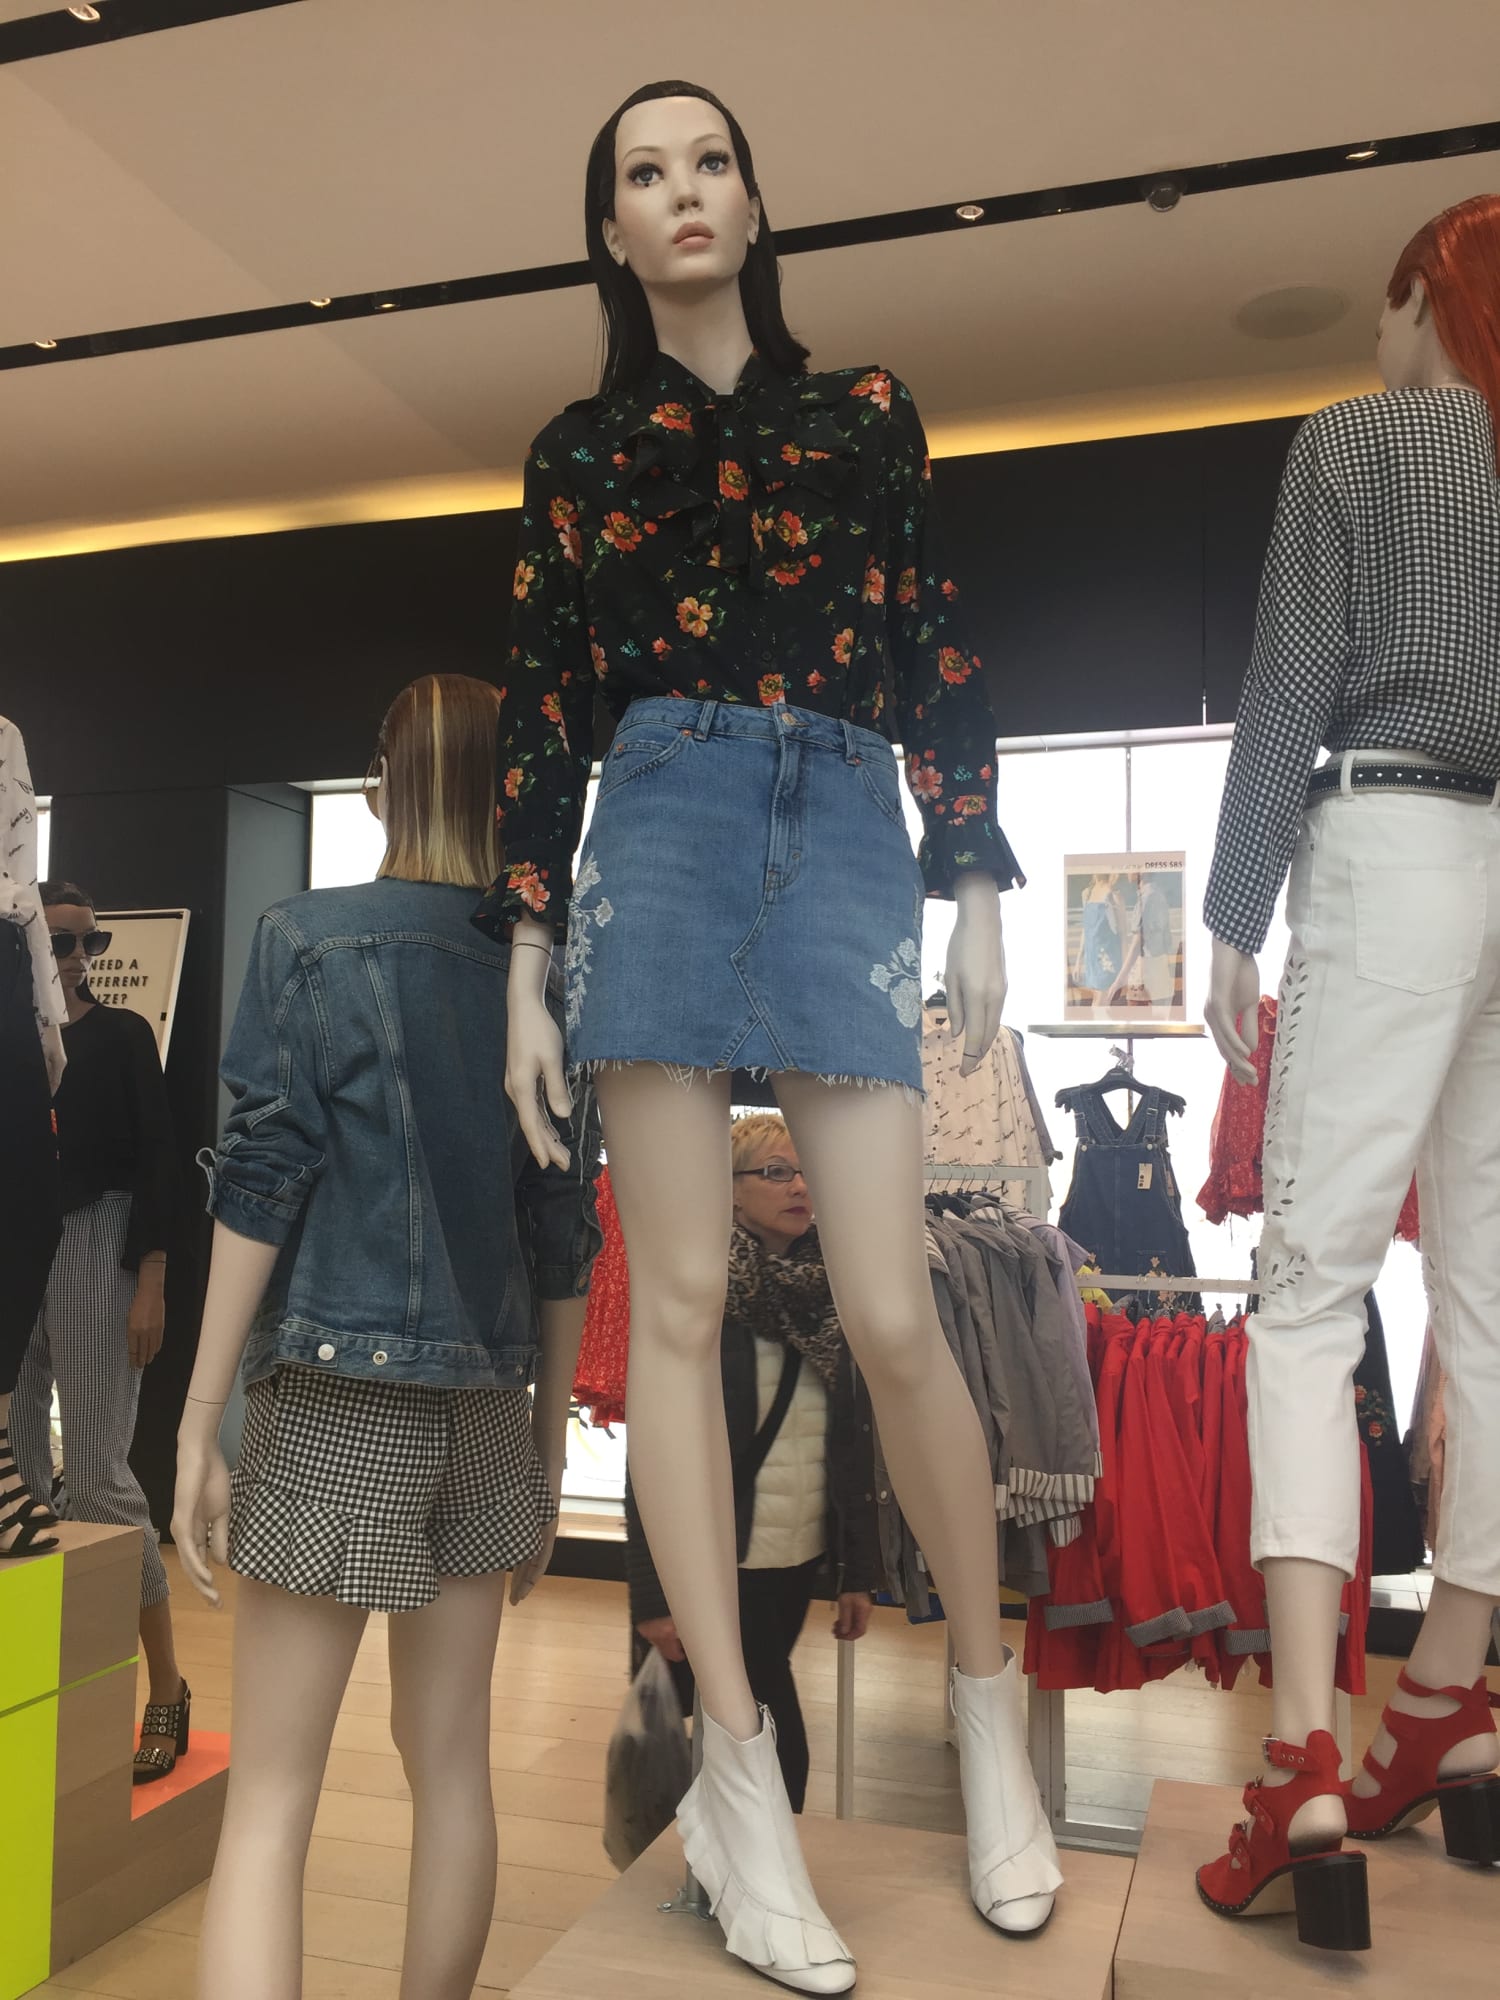 Most mannequins are still too skinny — and it's a serious problem